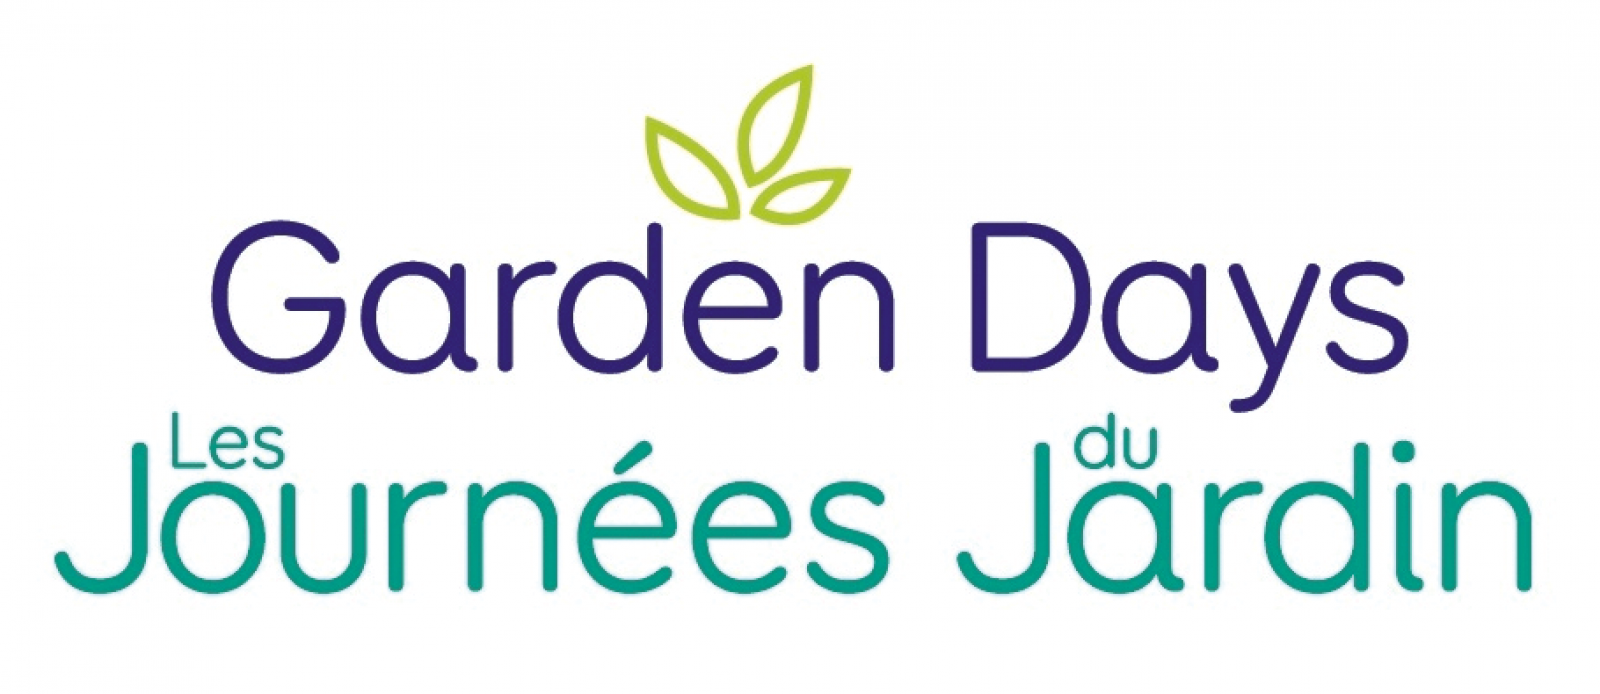 Garden Days coming this June